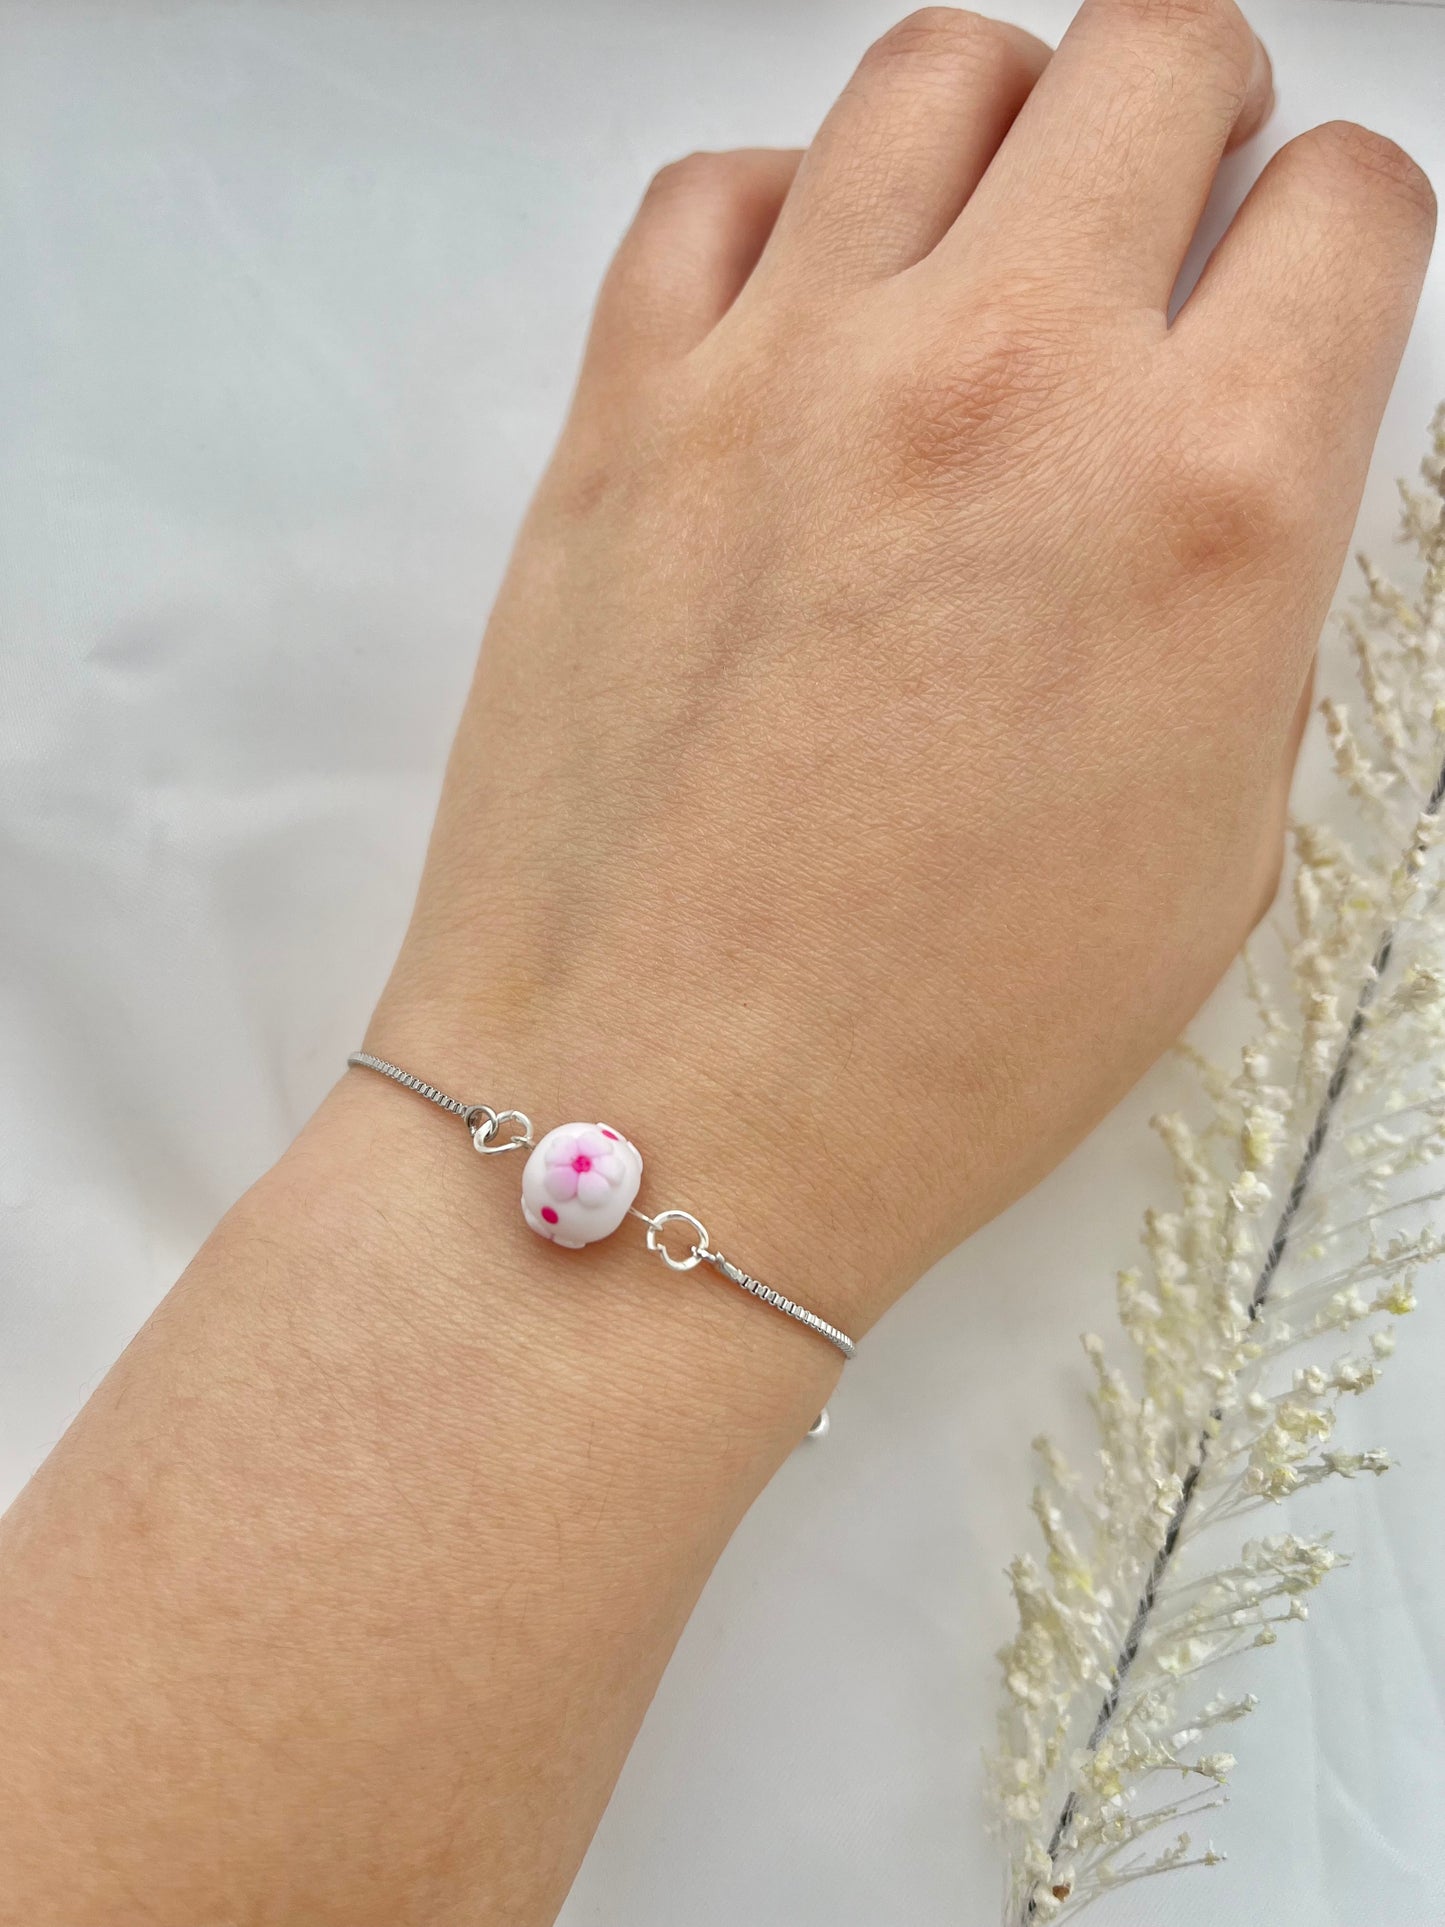 A floral bracelet with a rhodium plated chain in cherry blossom style with 1 bead on a hand